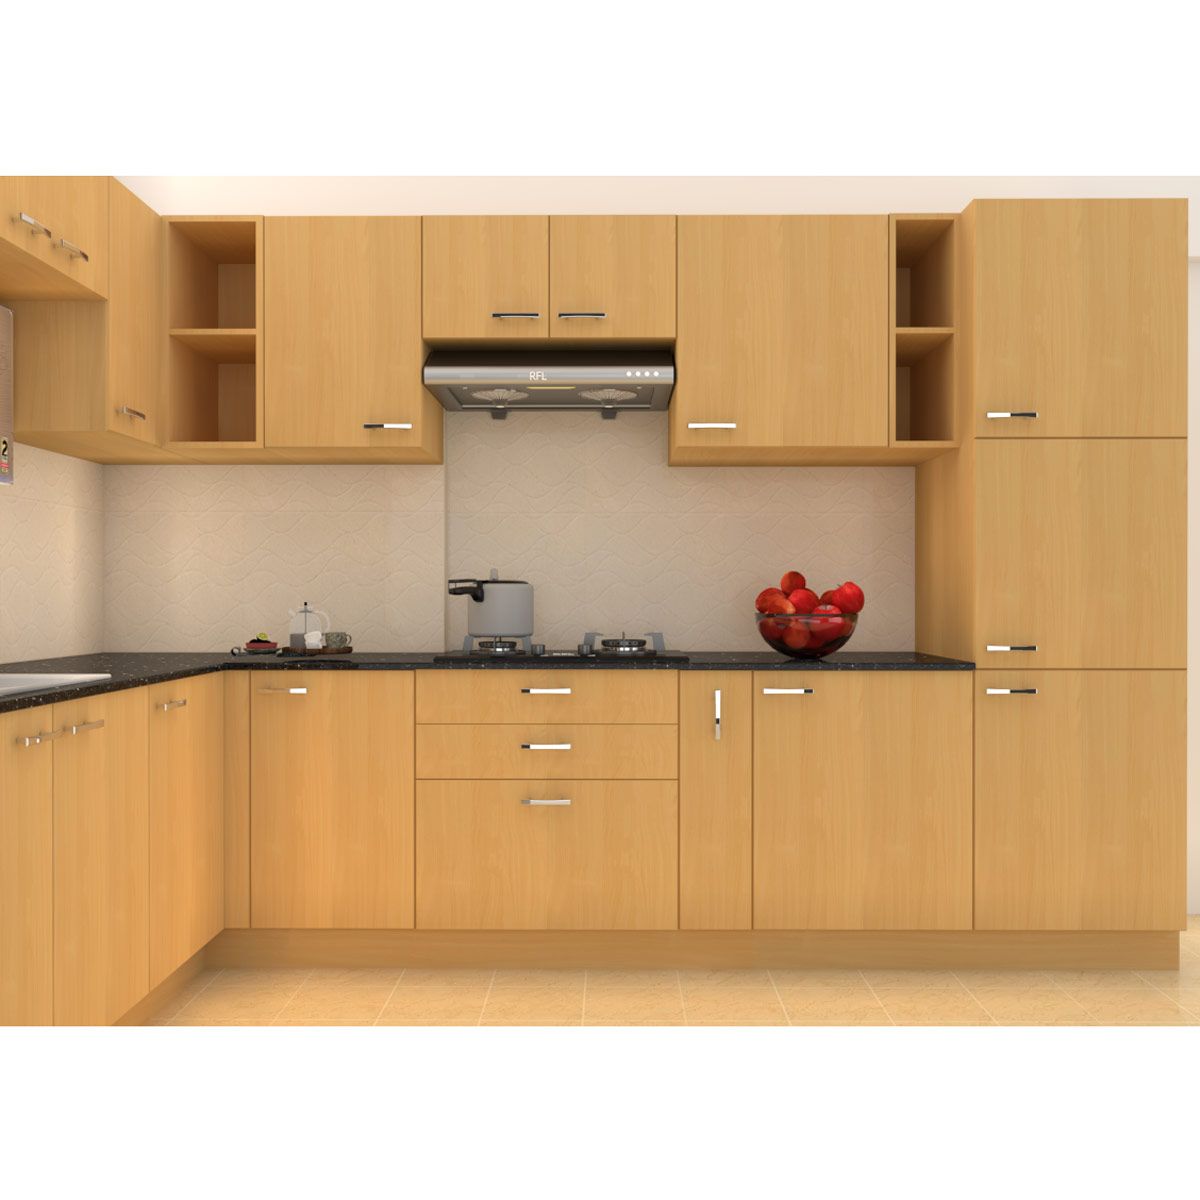 Things to Consider When Choosing a Kitchen Cabinet